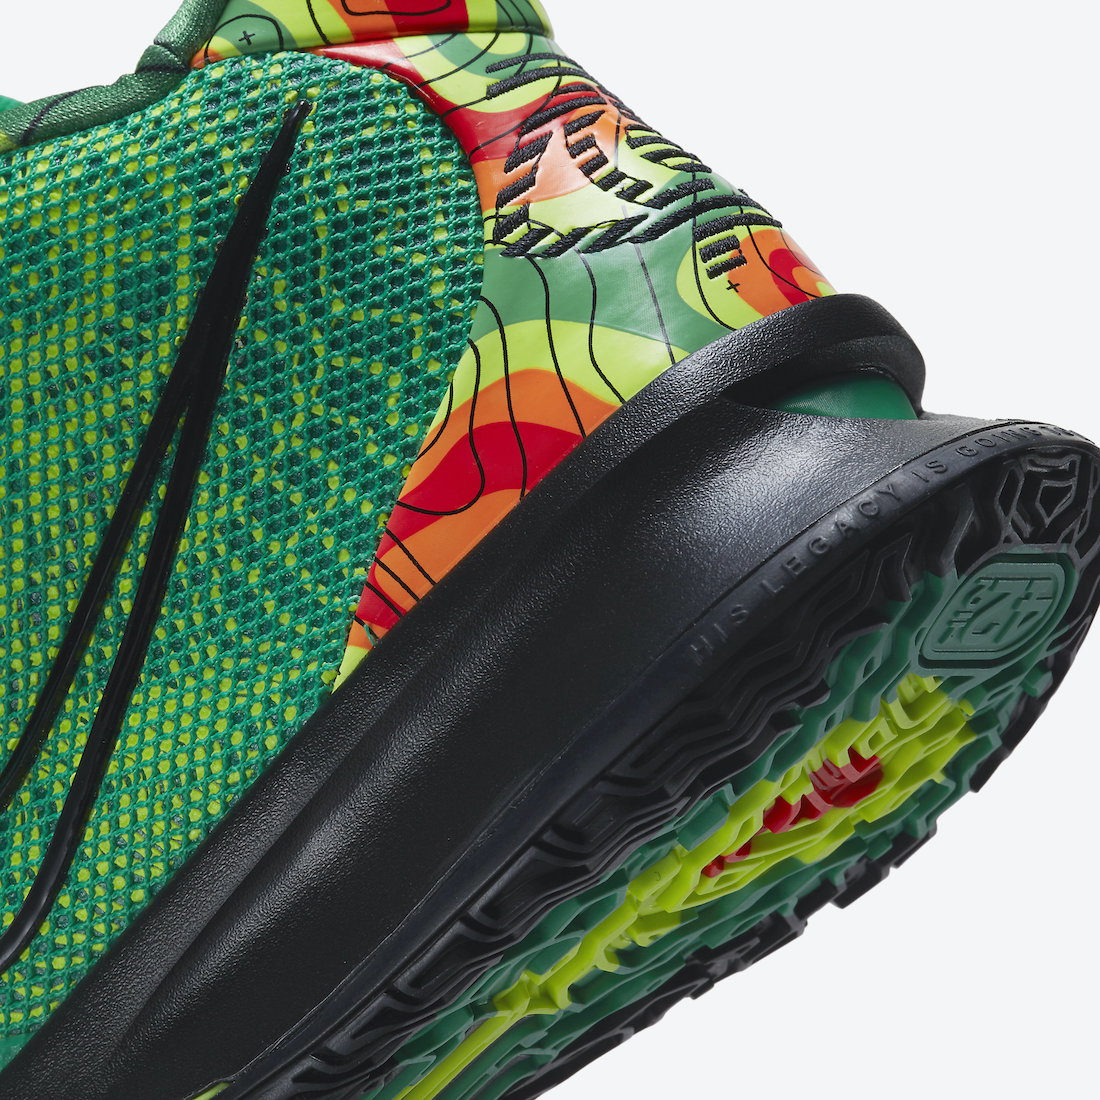 Nike Kyrie 7 Ky-D Weatherman CQ9326-300 Release Date